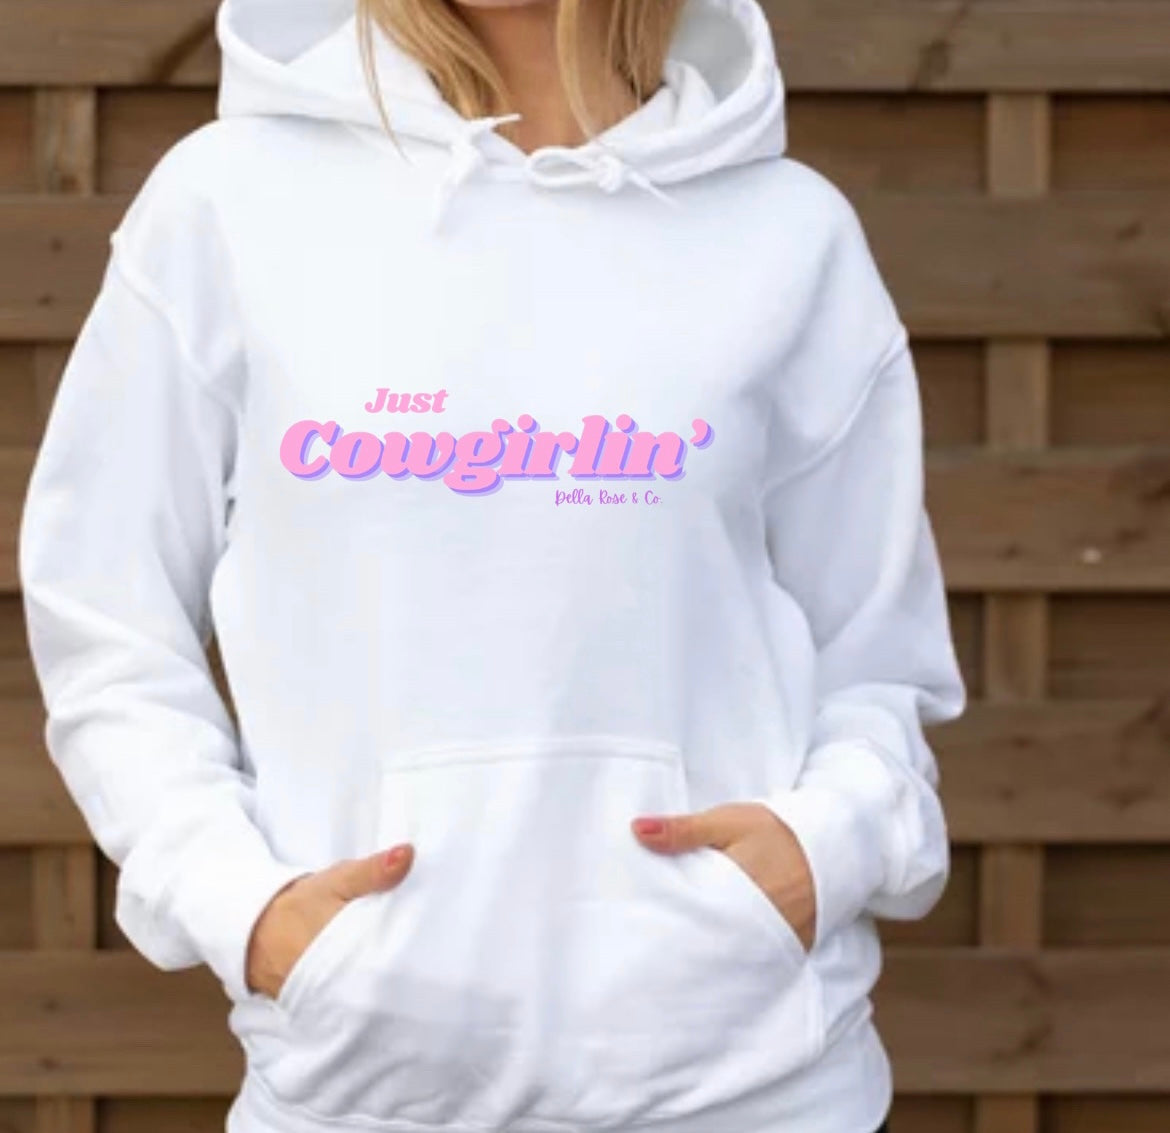 Just Cowgirlin’ Hoodie (unisex sizes)